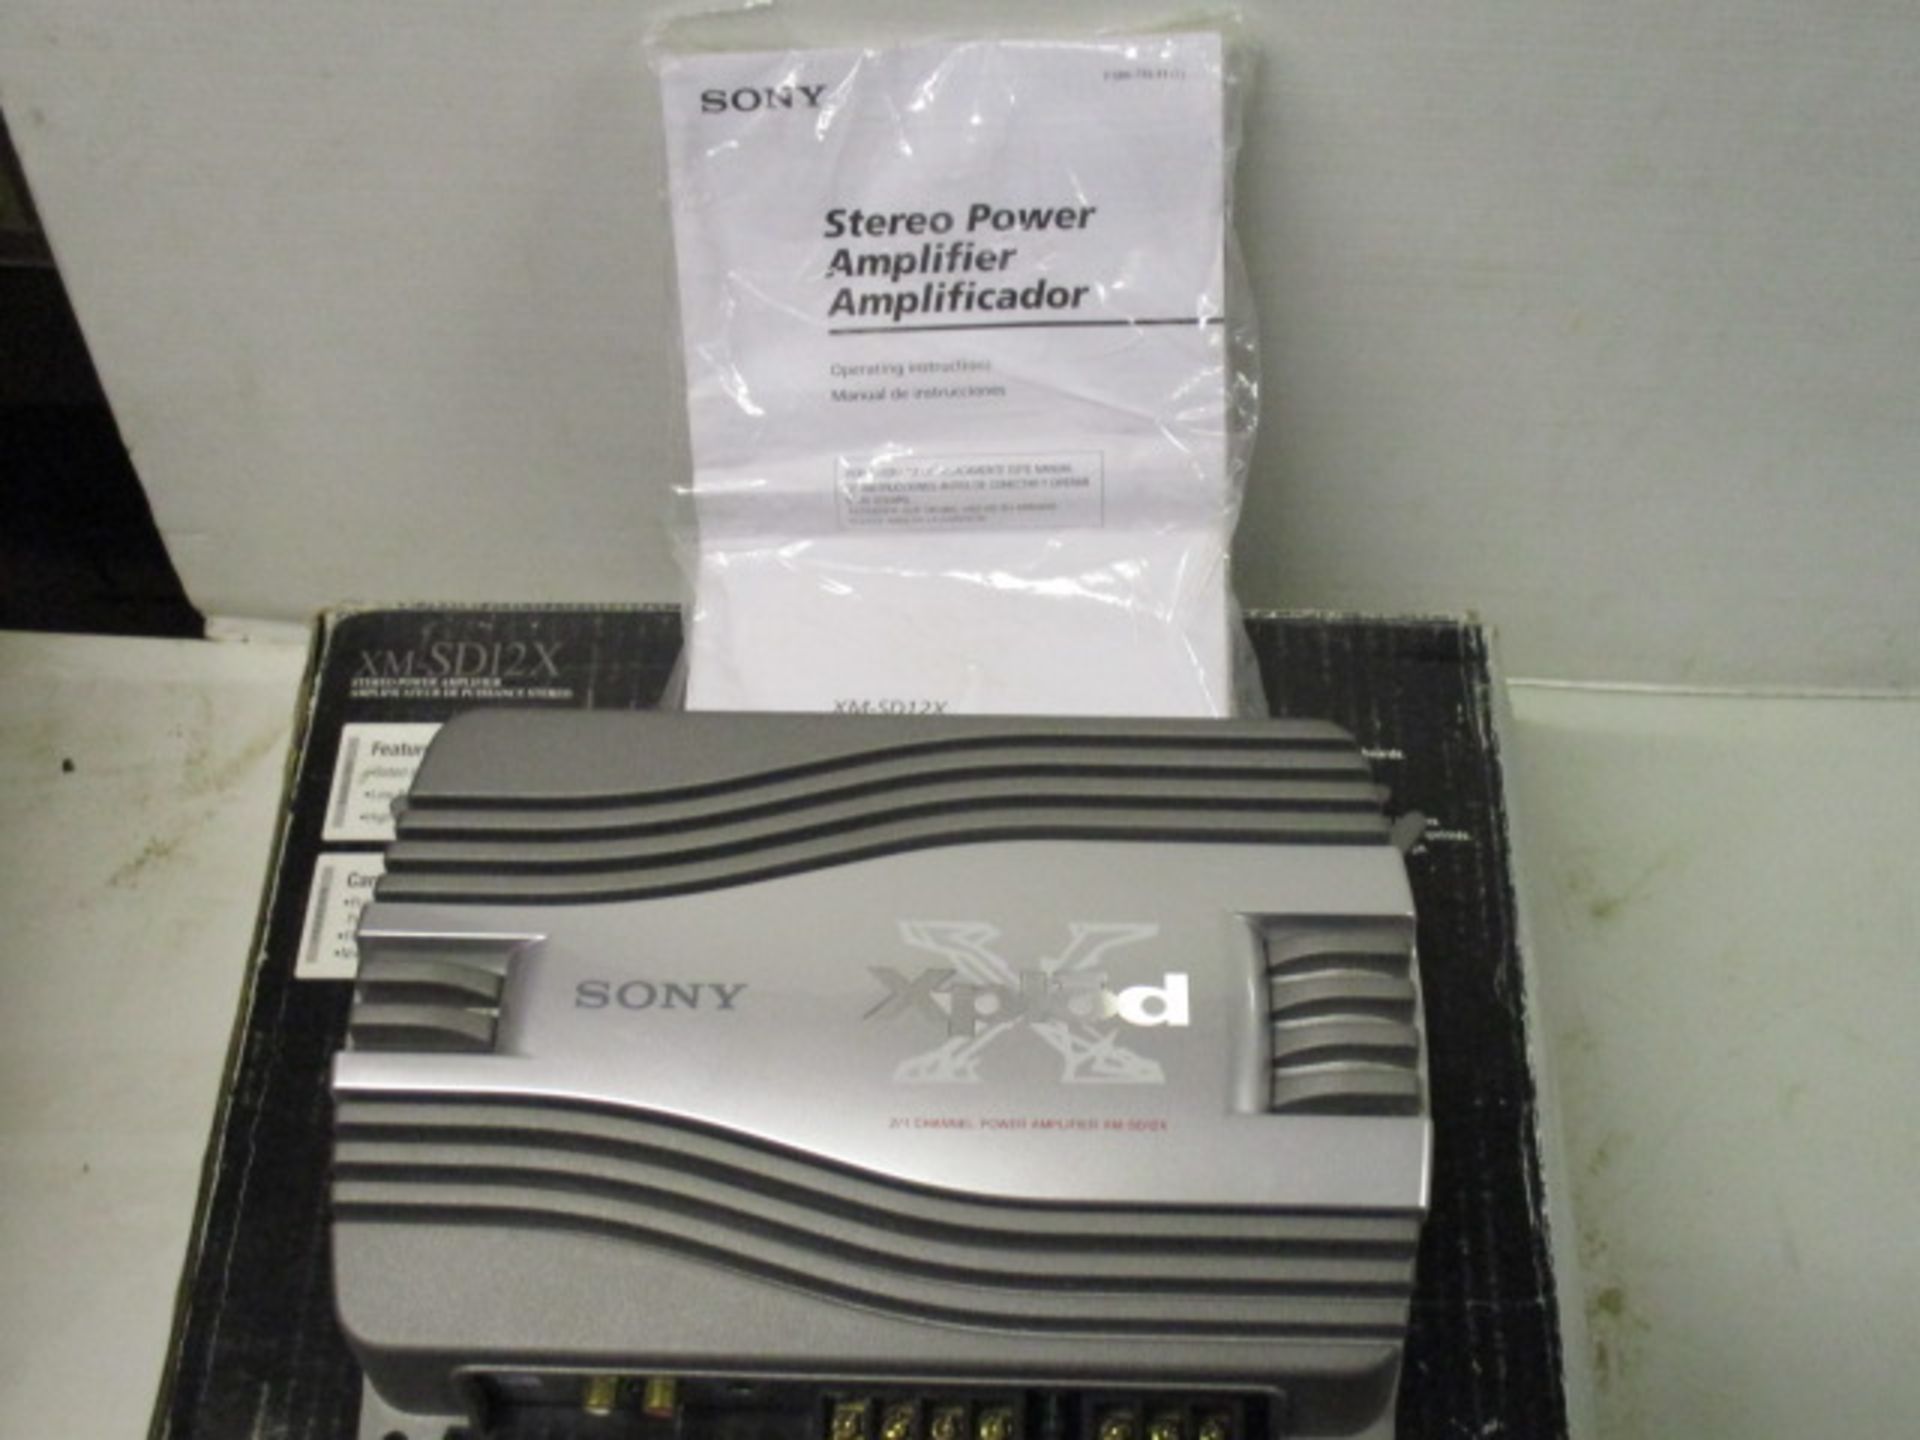 Sony Xplode amplifier unit - boxed new and unused with manual - rrp £179.99 - Image 2 of 3